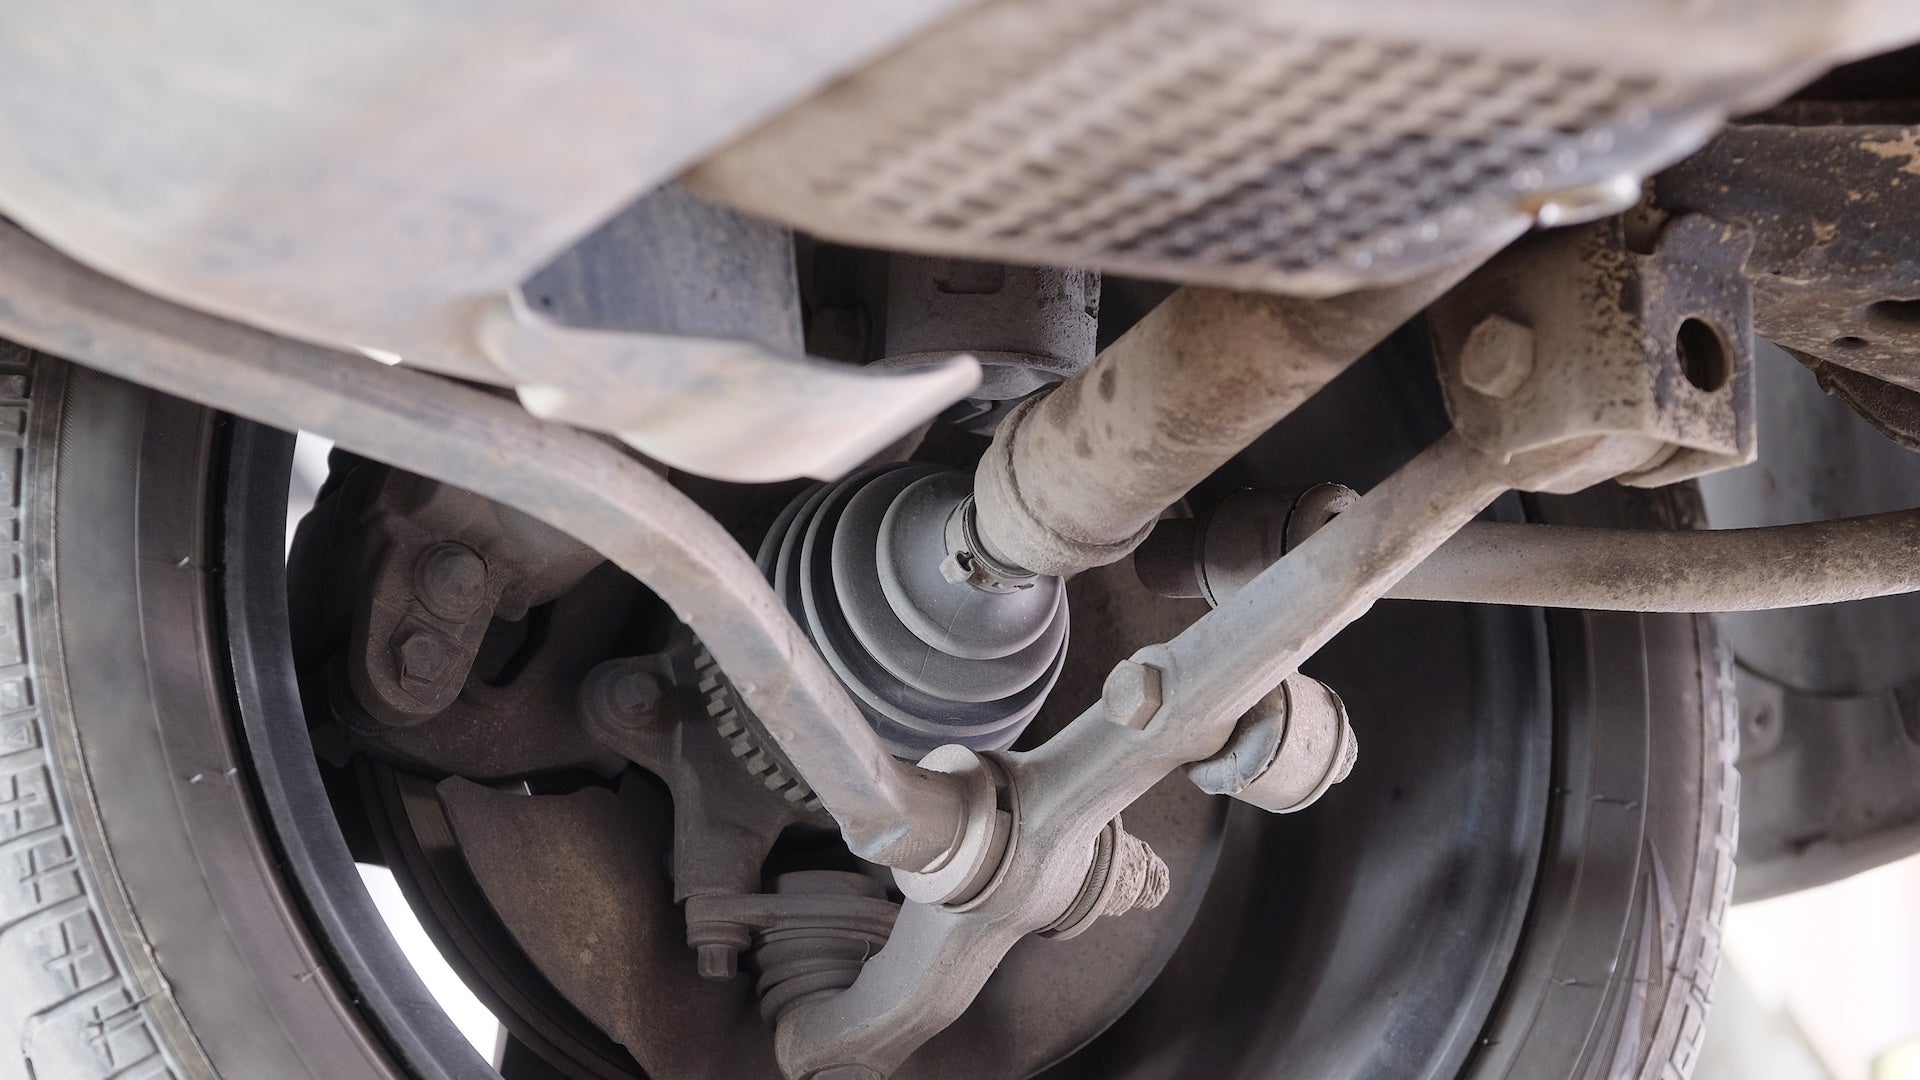 how much do cv joints cost to fix